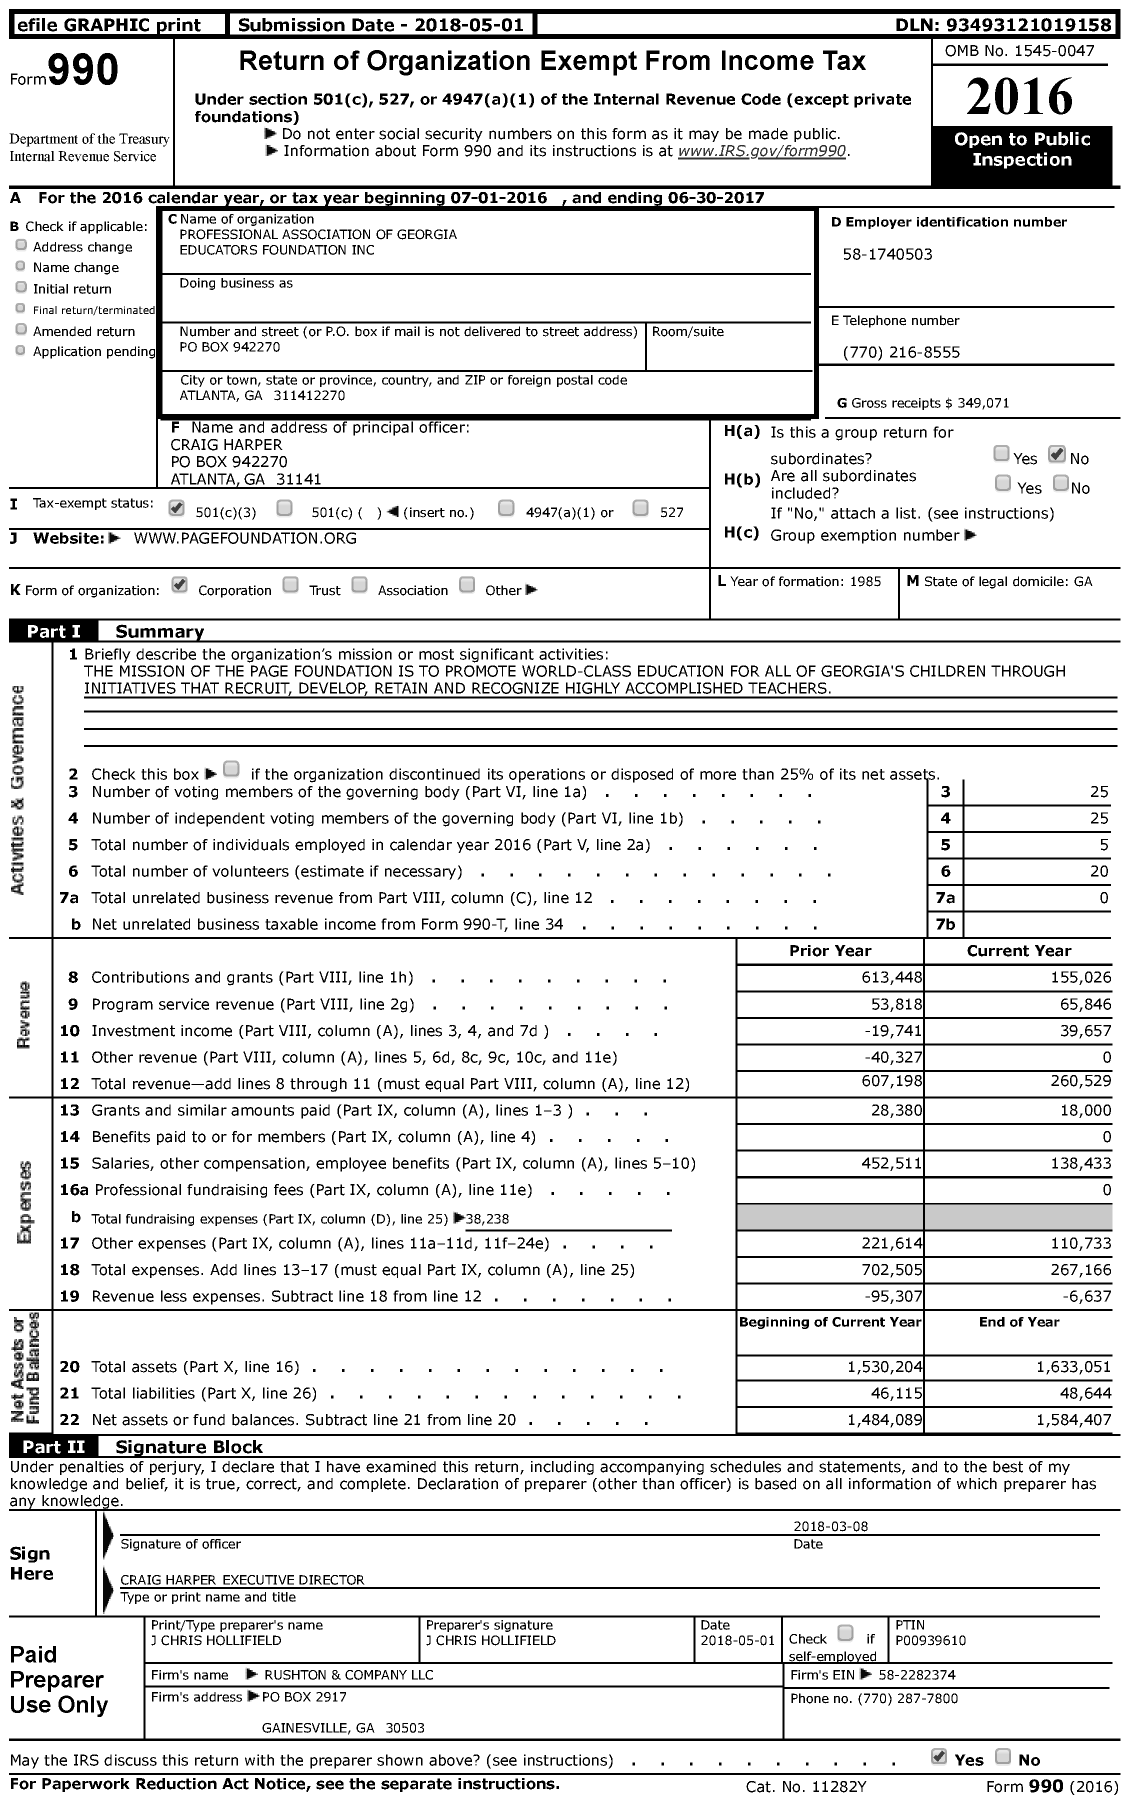 Image of first page of 2016 Form 990 for Professional Association of Georgia Educators Foundation